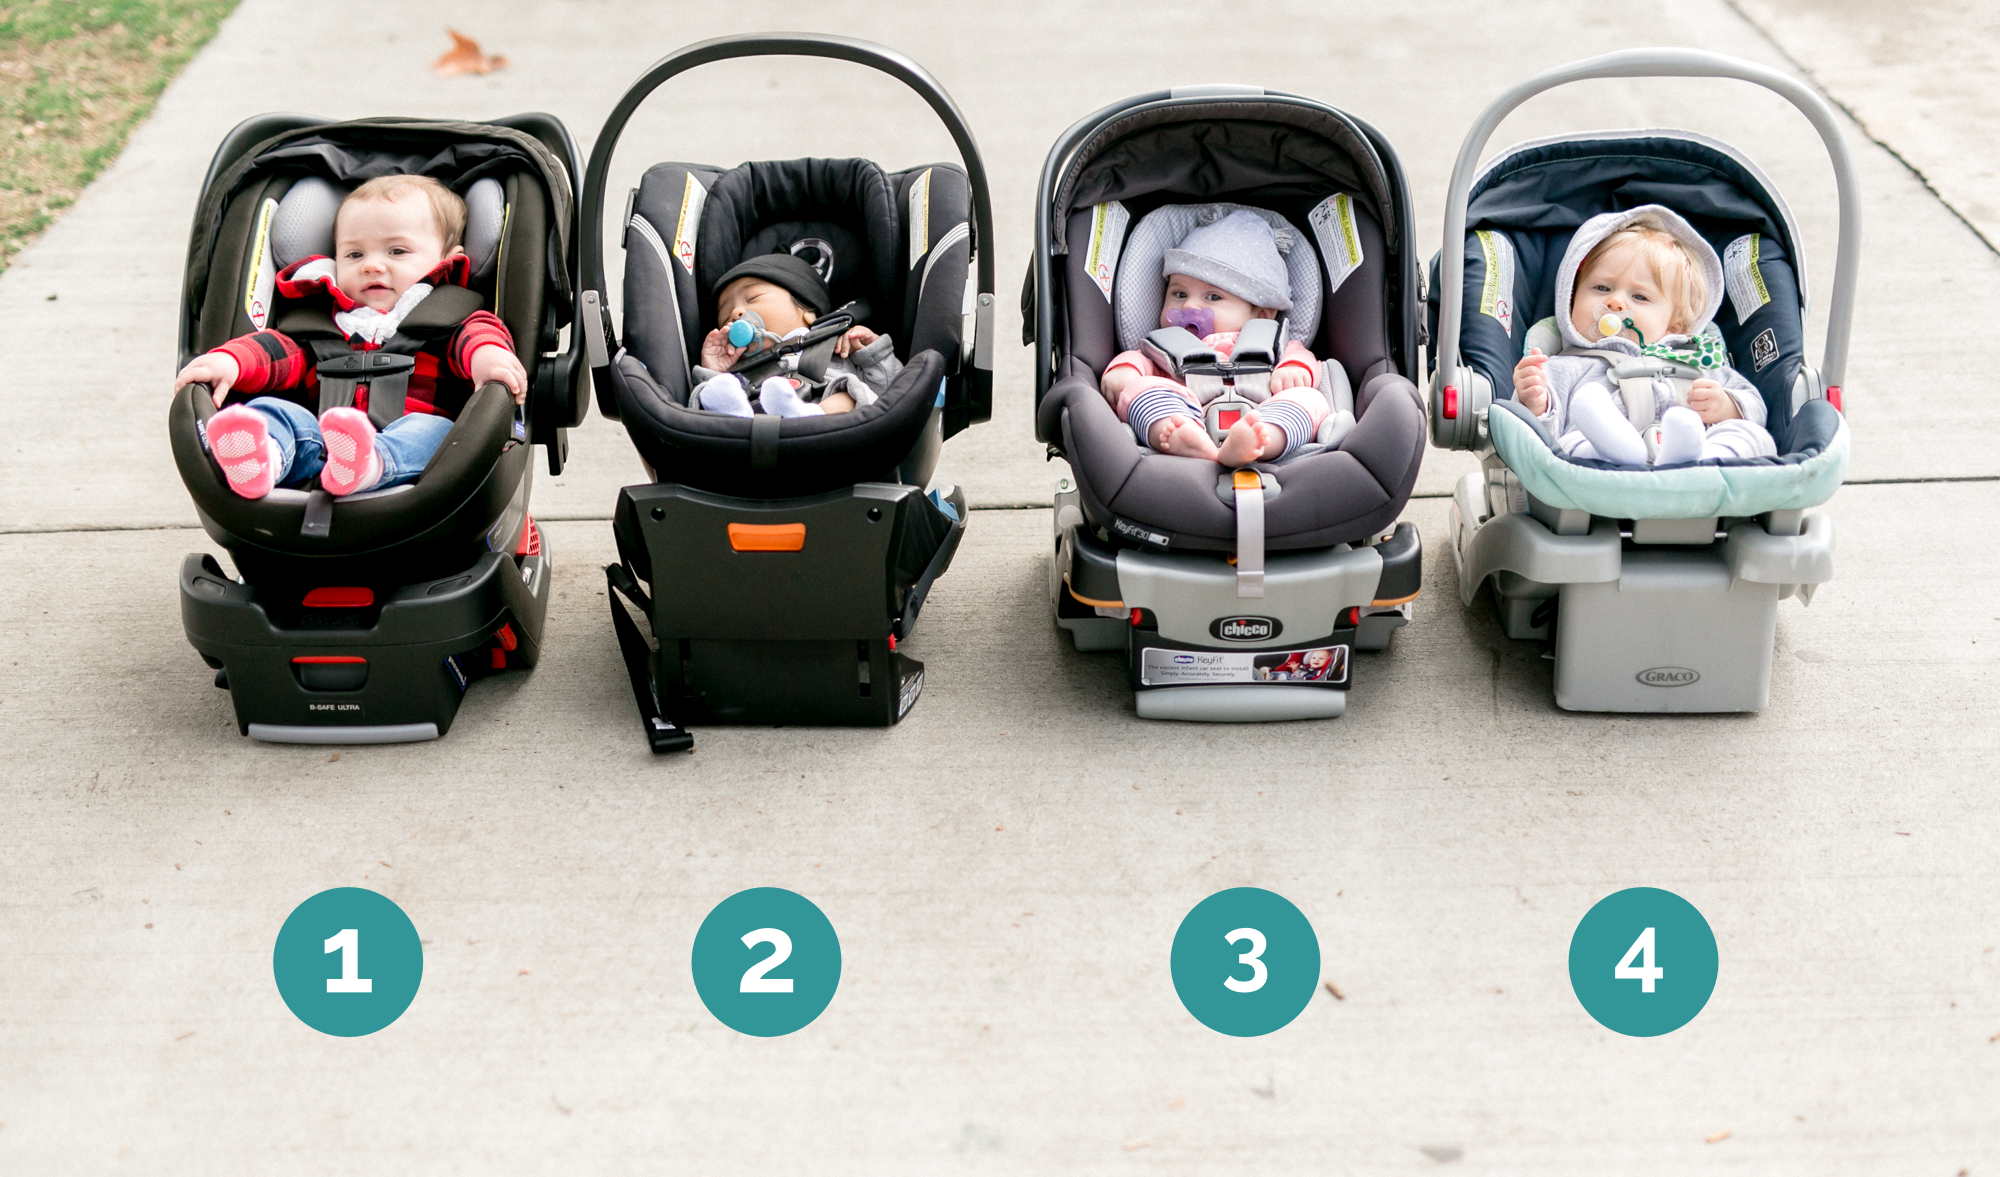 The Best Infant Car Seats Of 2021, What Is The Safest Rated Infant Car Seat